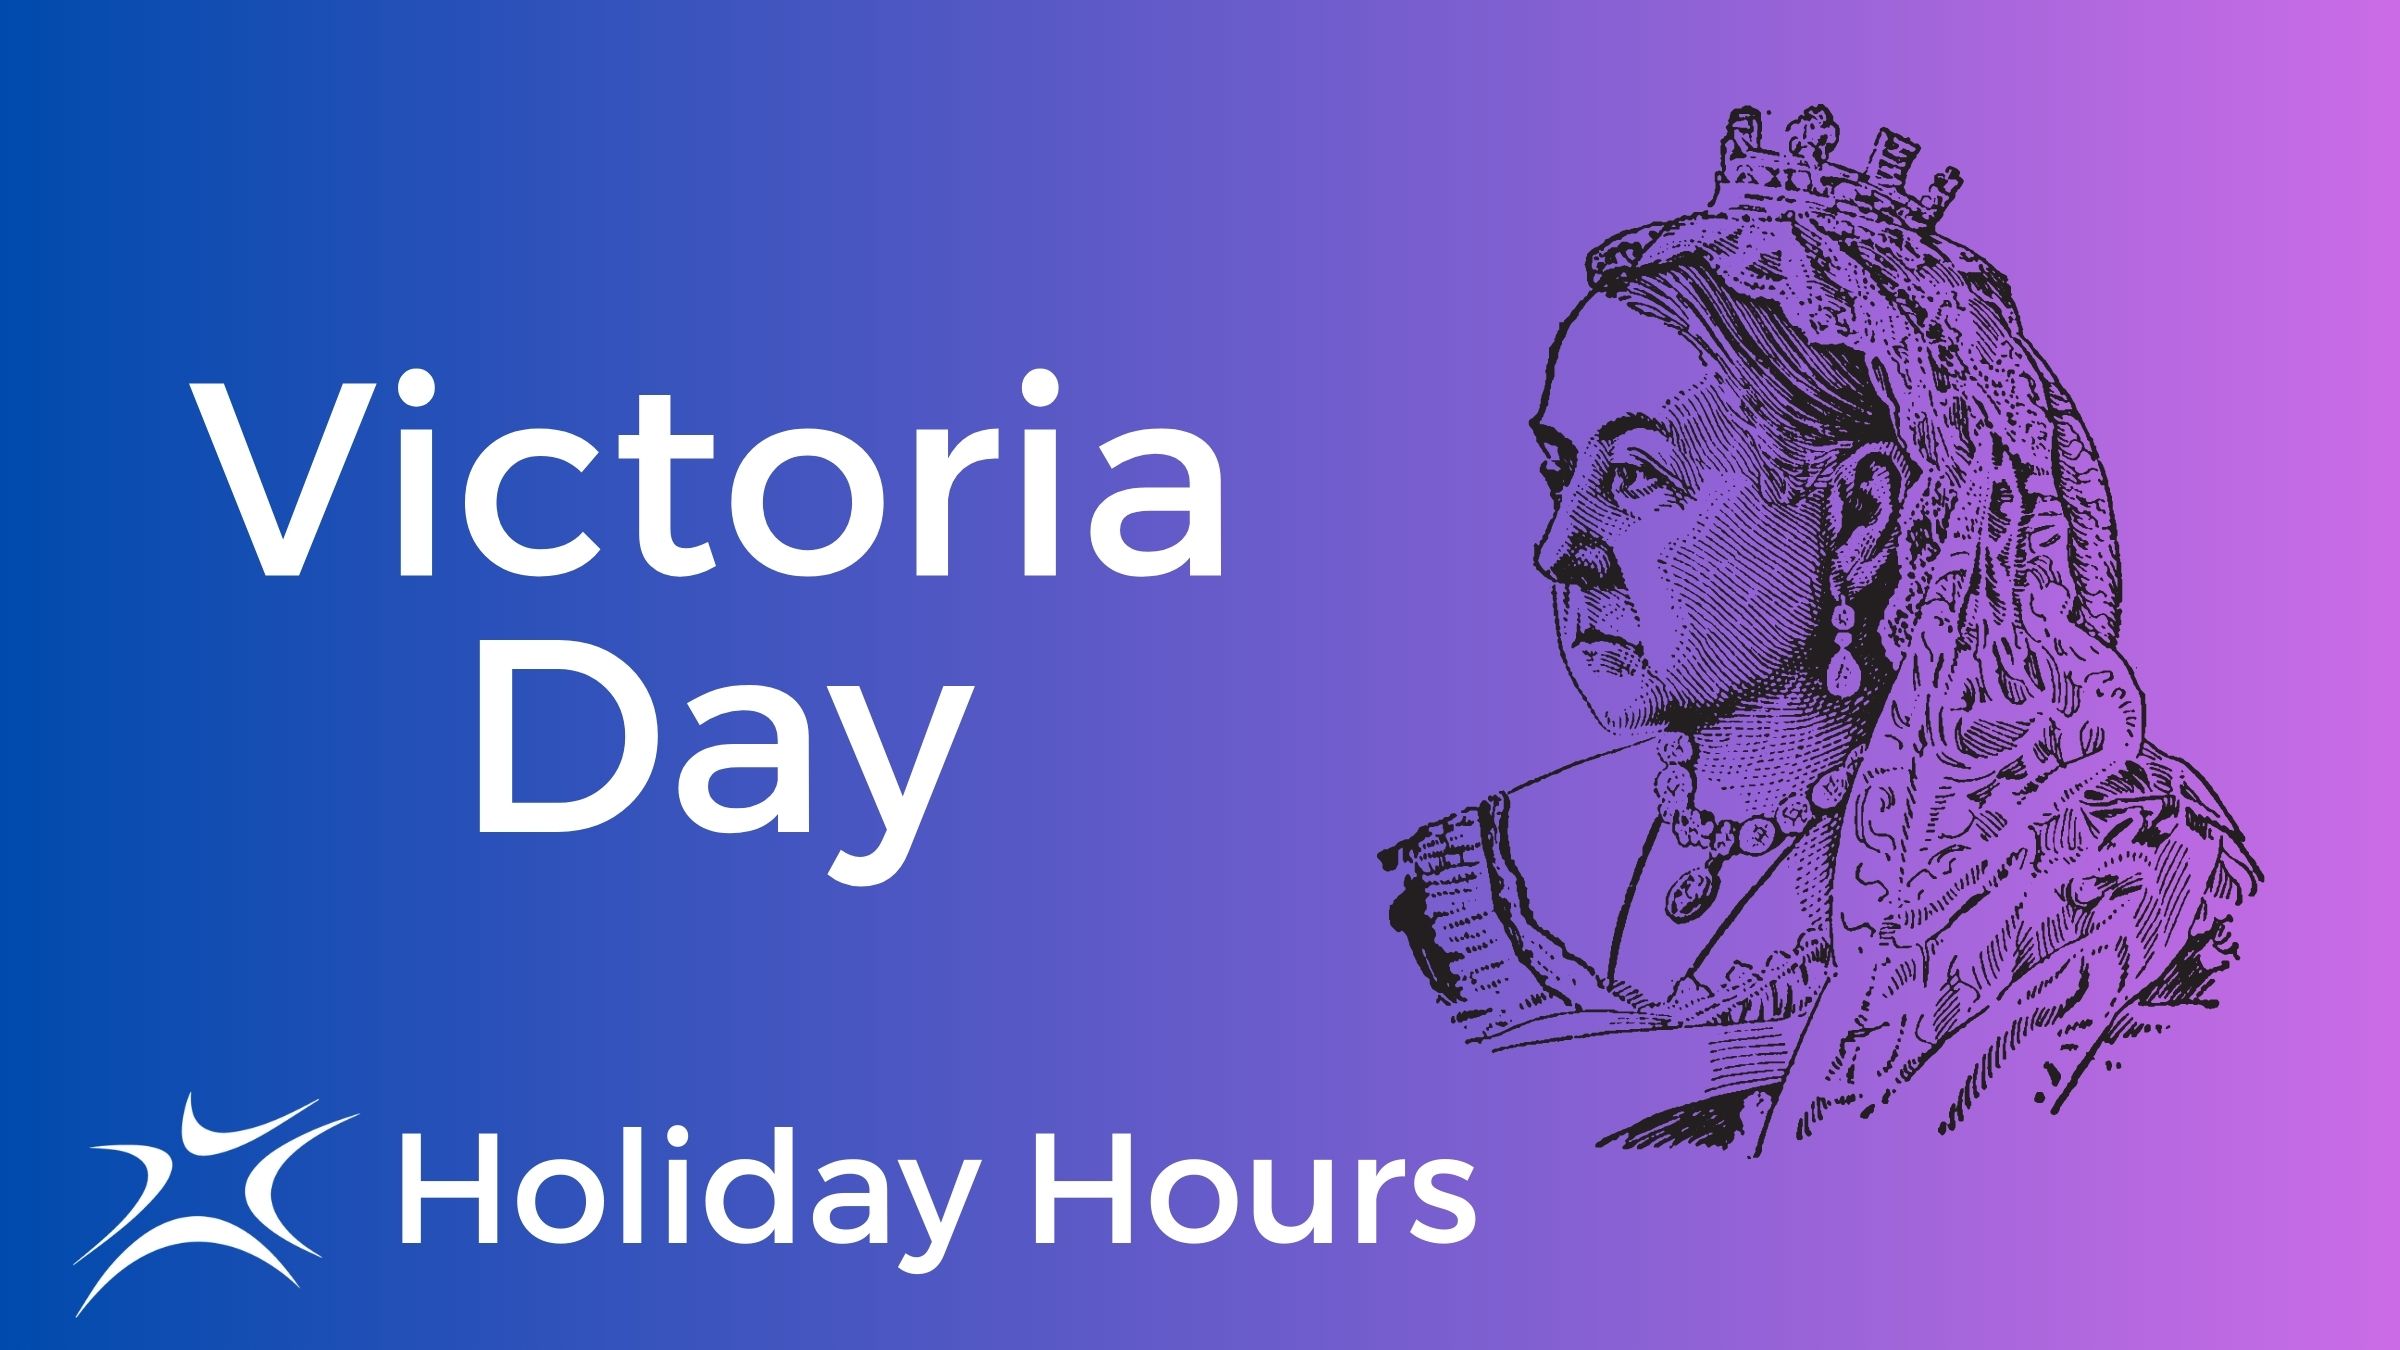 a graphic of Queen Victoria on a blue and purple background with white text that reads 